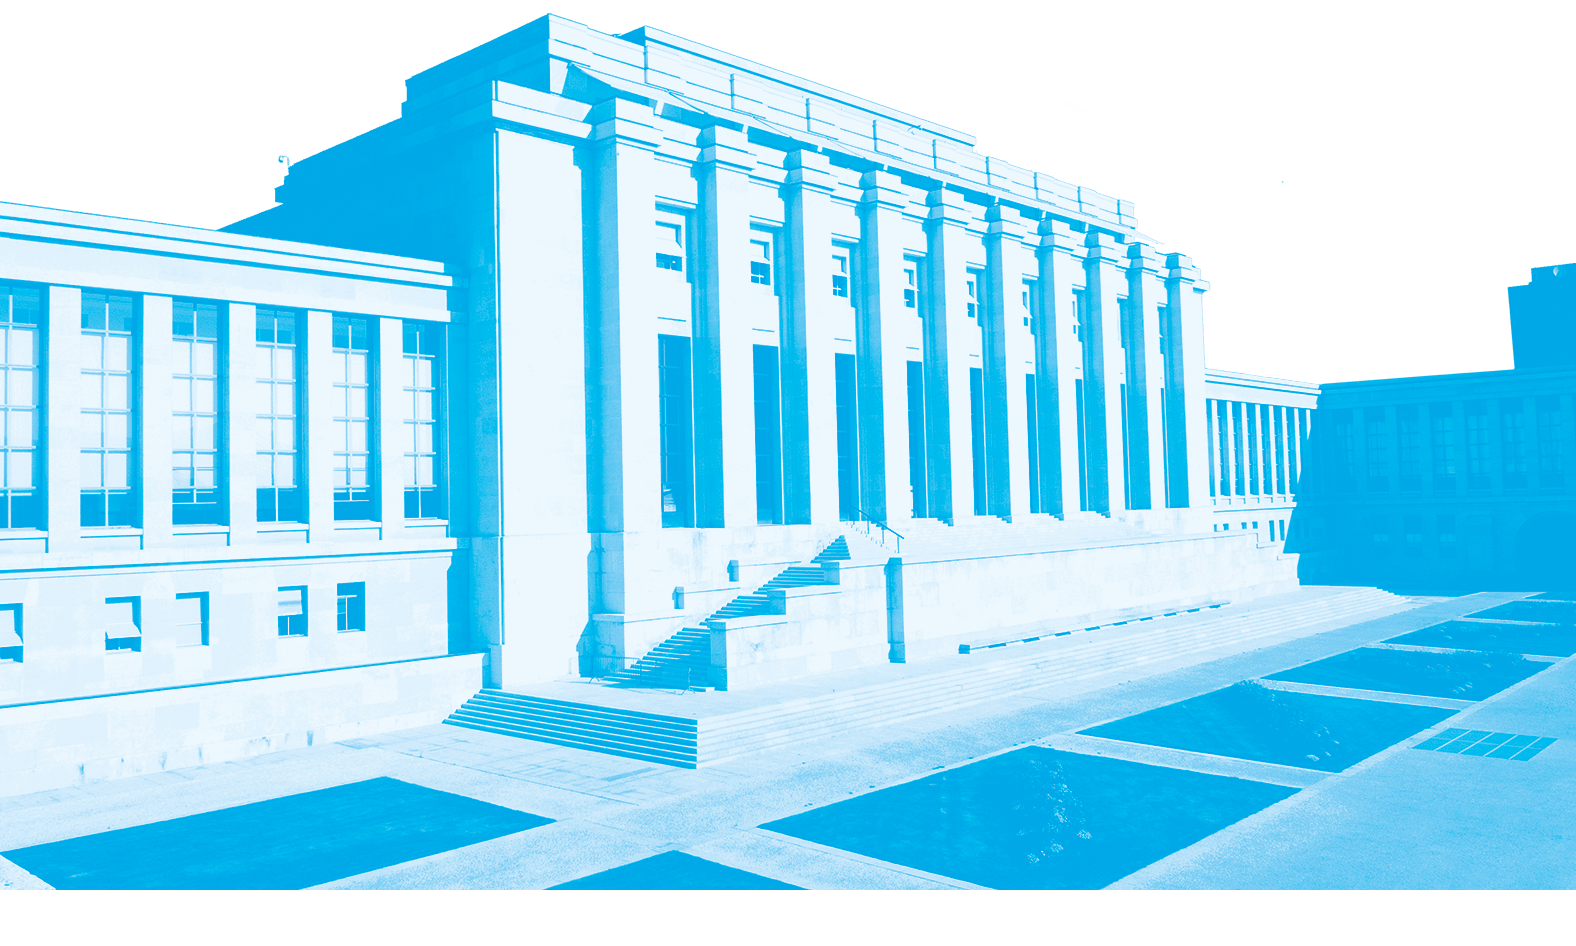 A blue and white image of a historical building at the Palais des Nations, which has tall windows and faces a large courtyard.